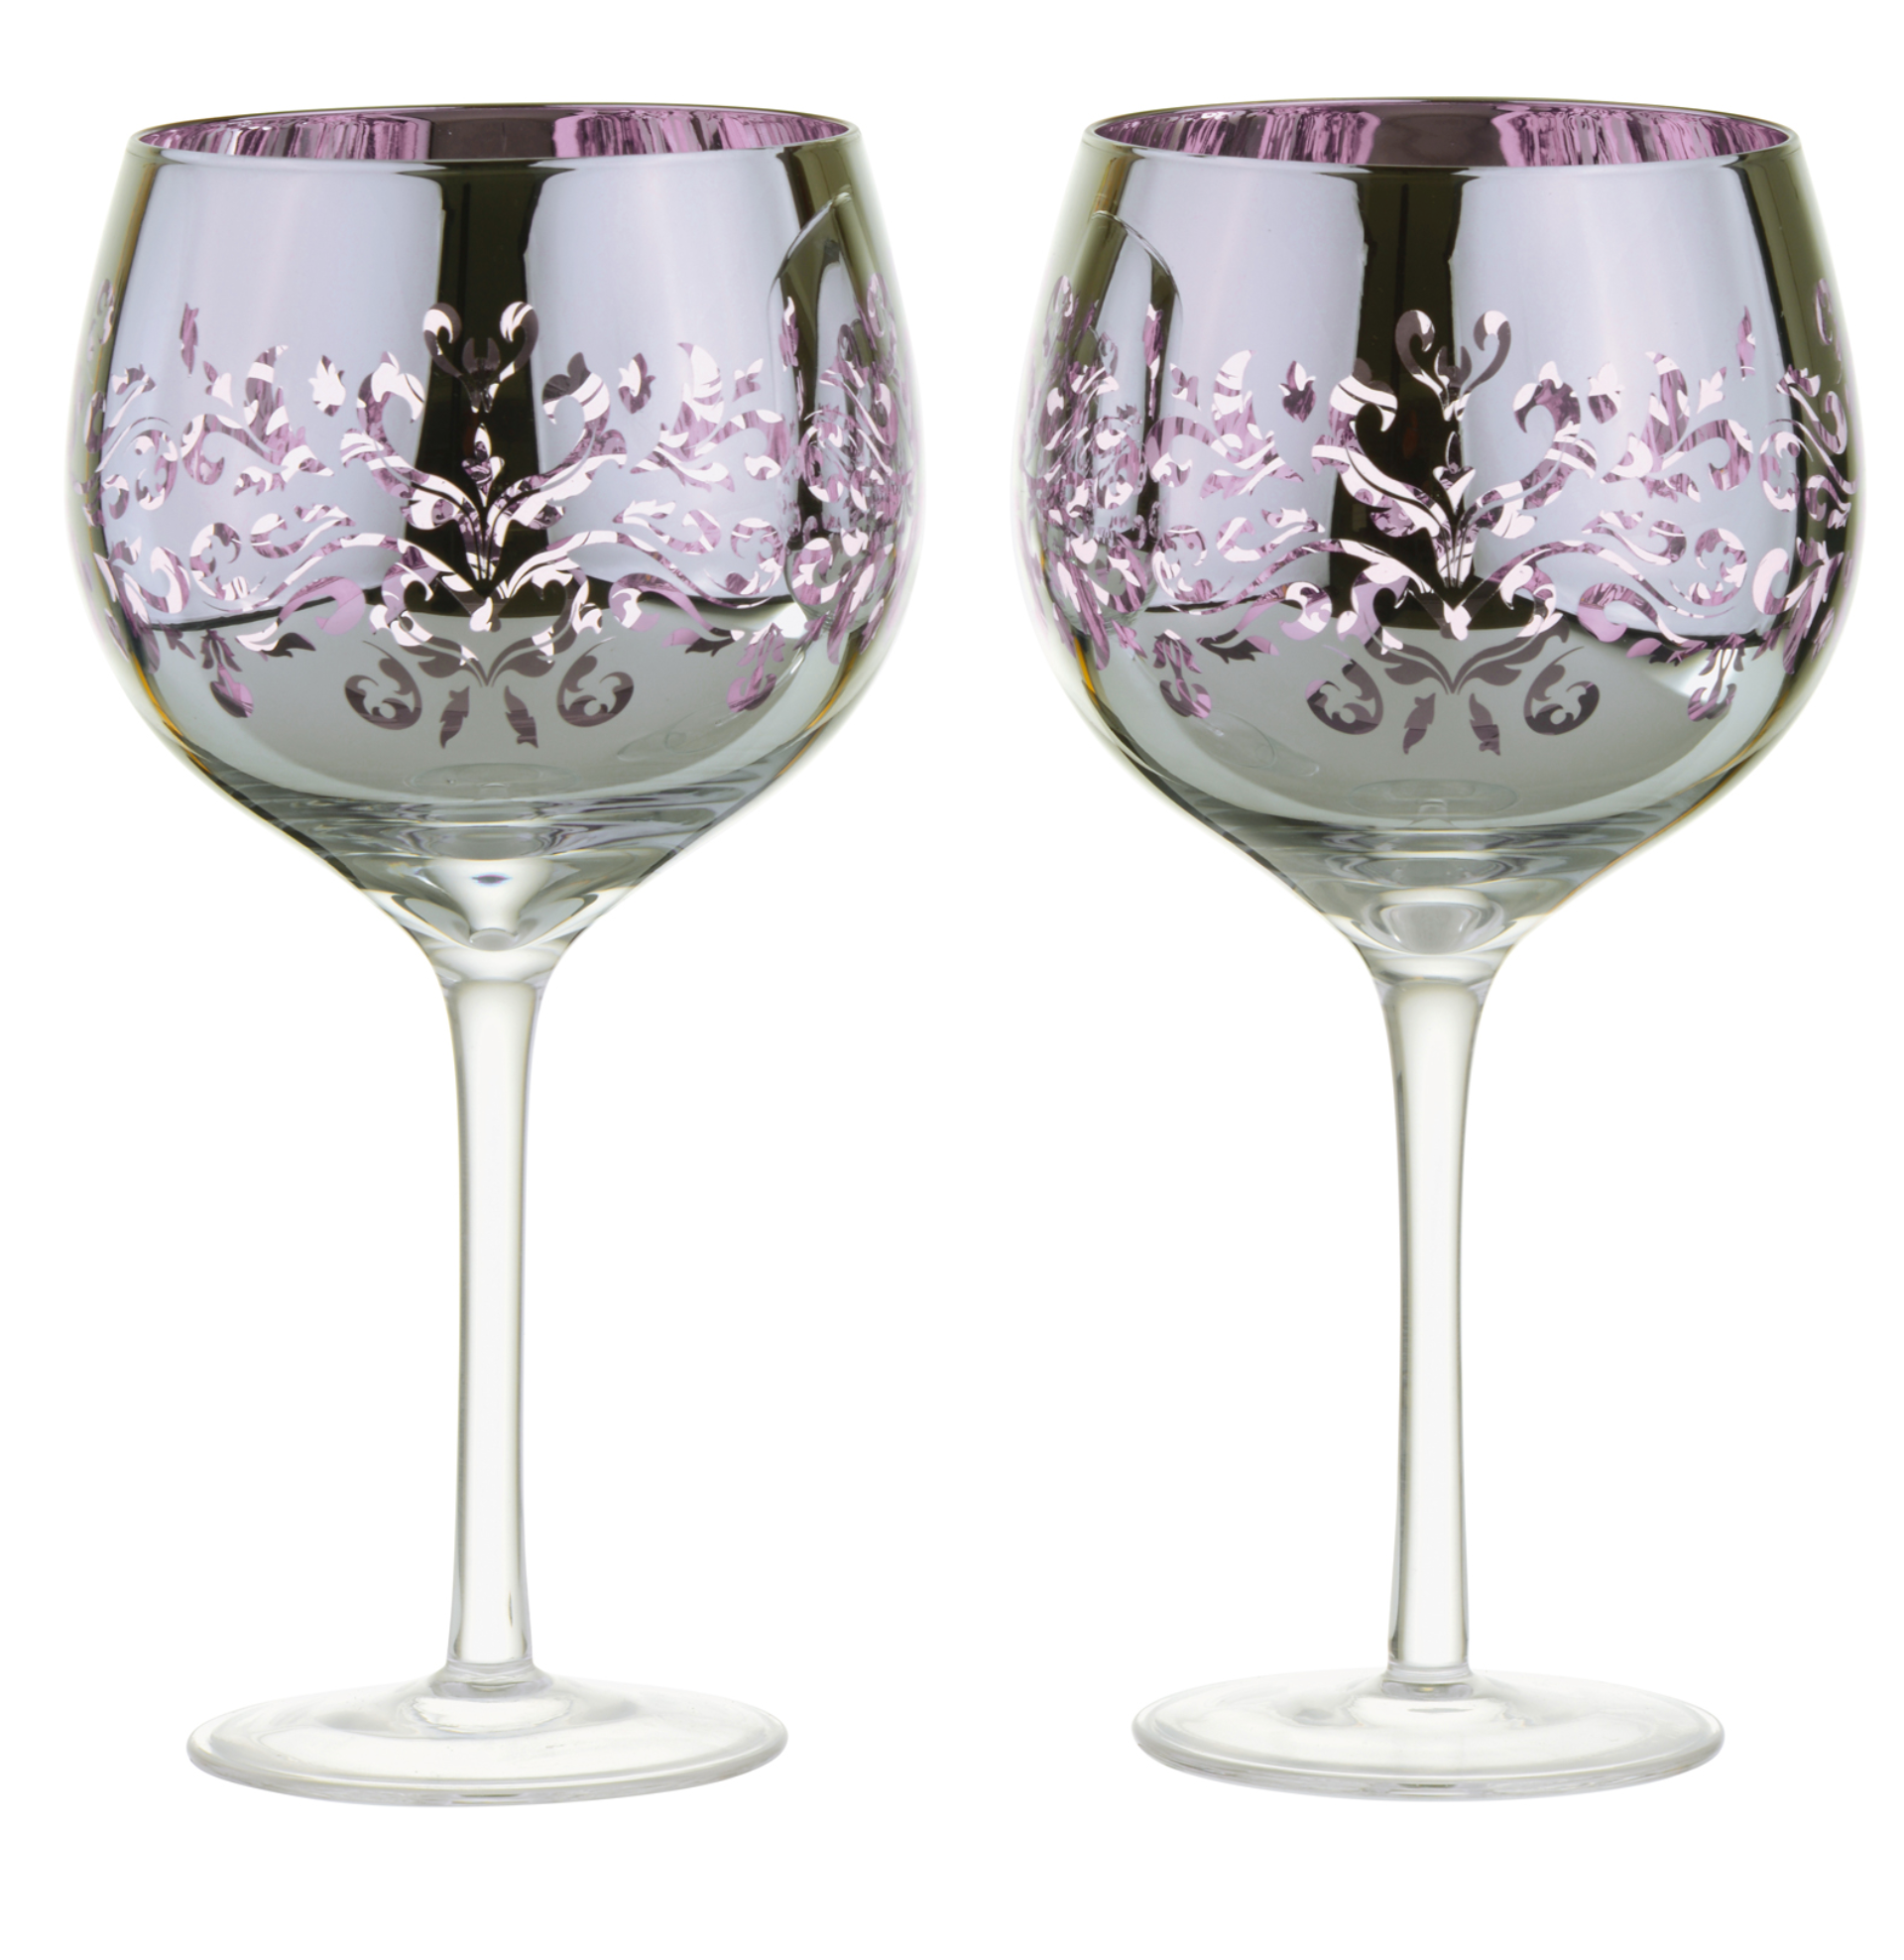 Electroplated Lilac Filigree Gin Glass